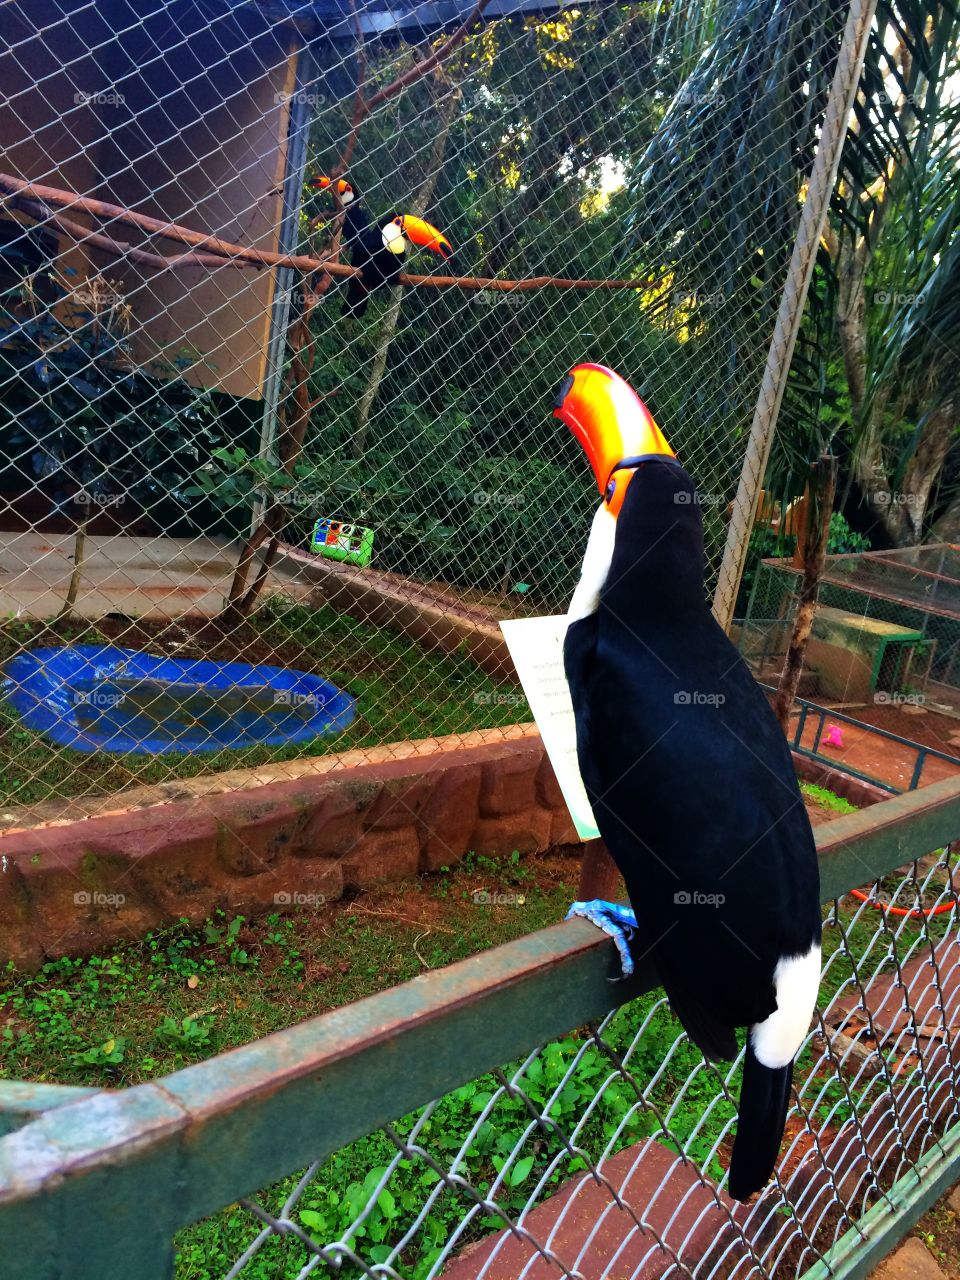 Toucan. Toucan watching others